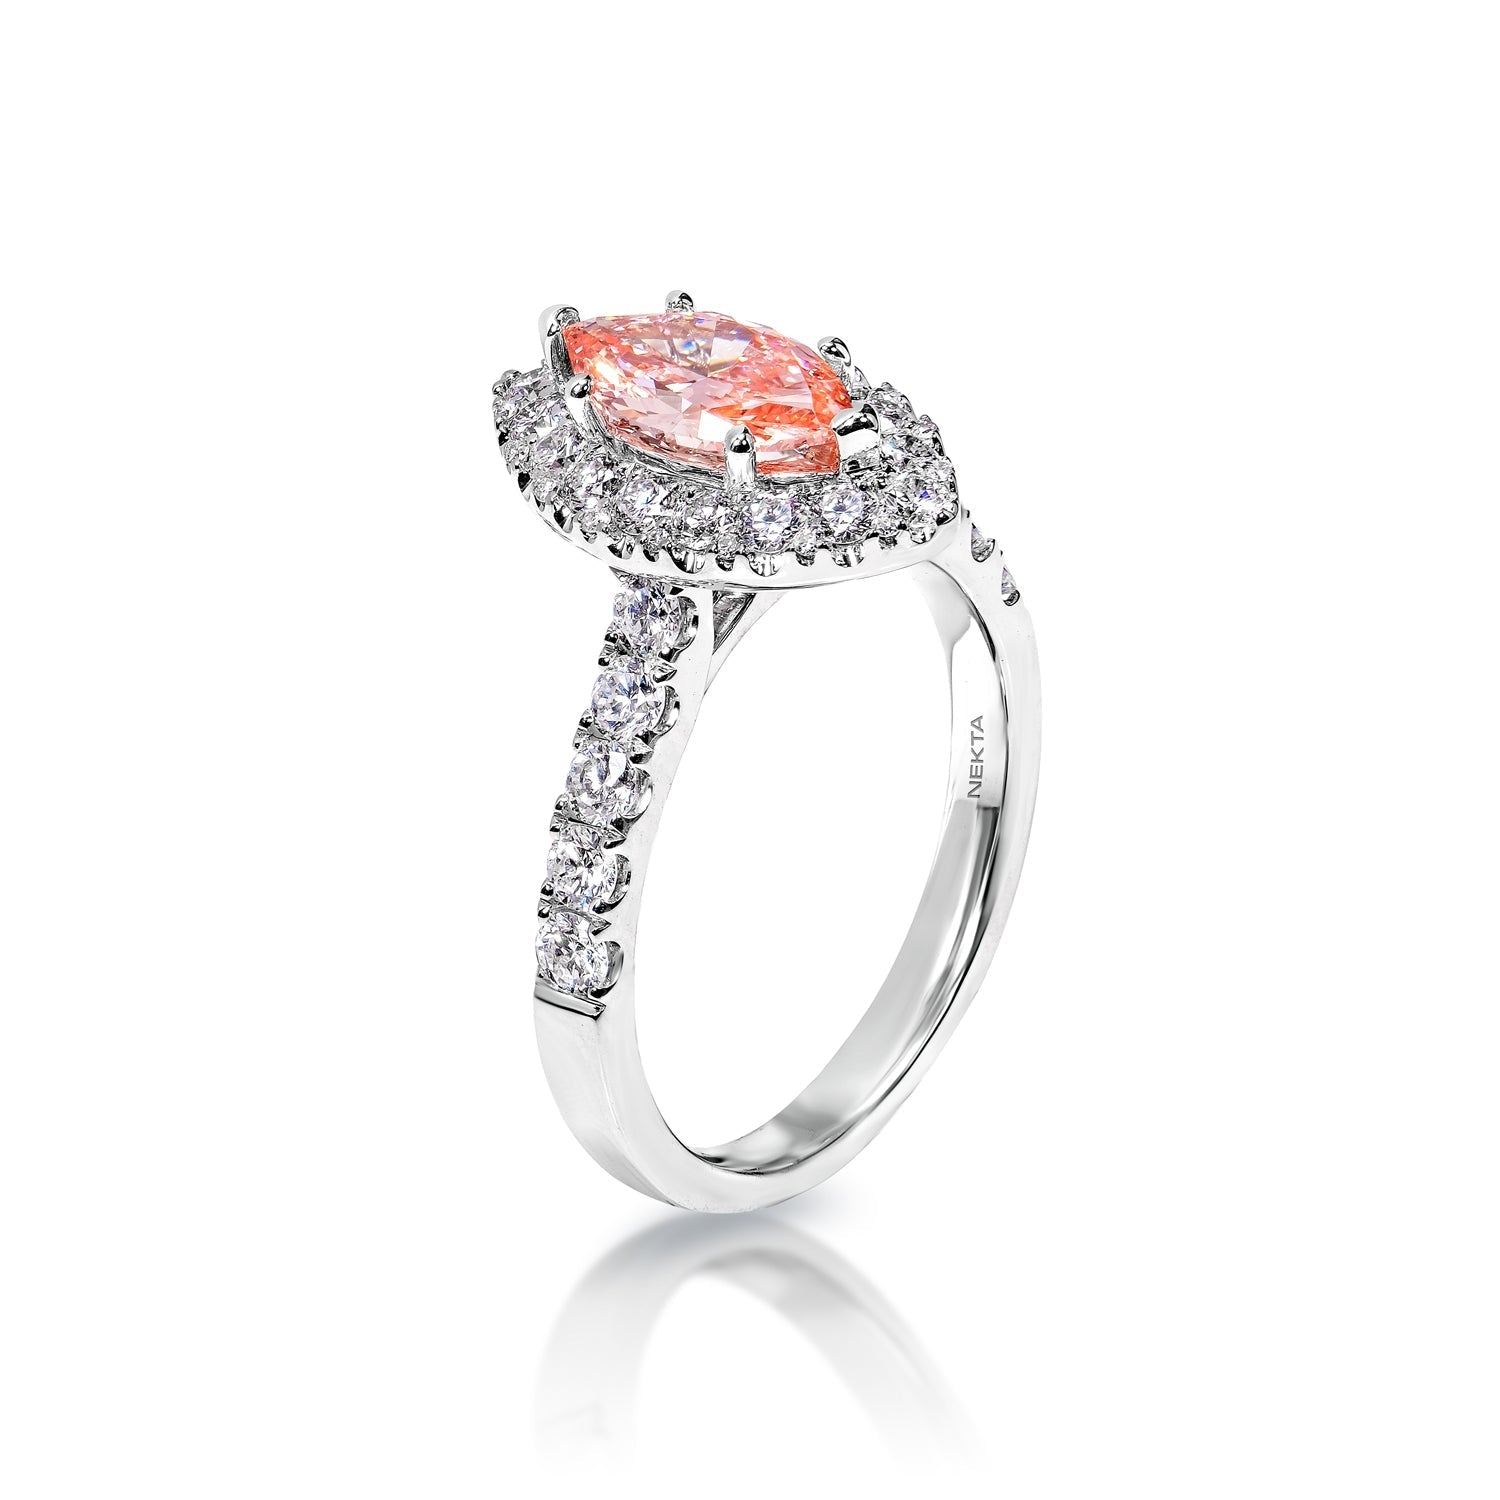 Noemi 2 Carat Fancy Vivid Pink VS1 Marquise Cut Diamond Engagement Ring in 18k White Gold Side View